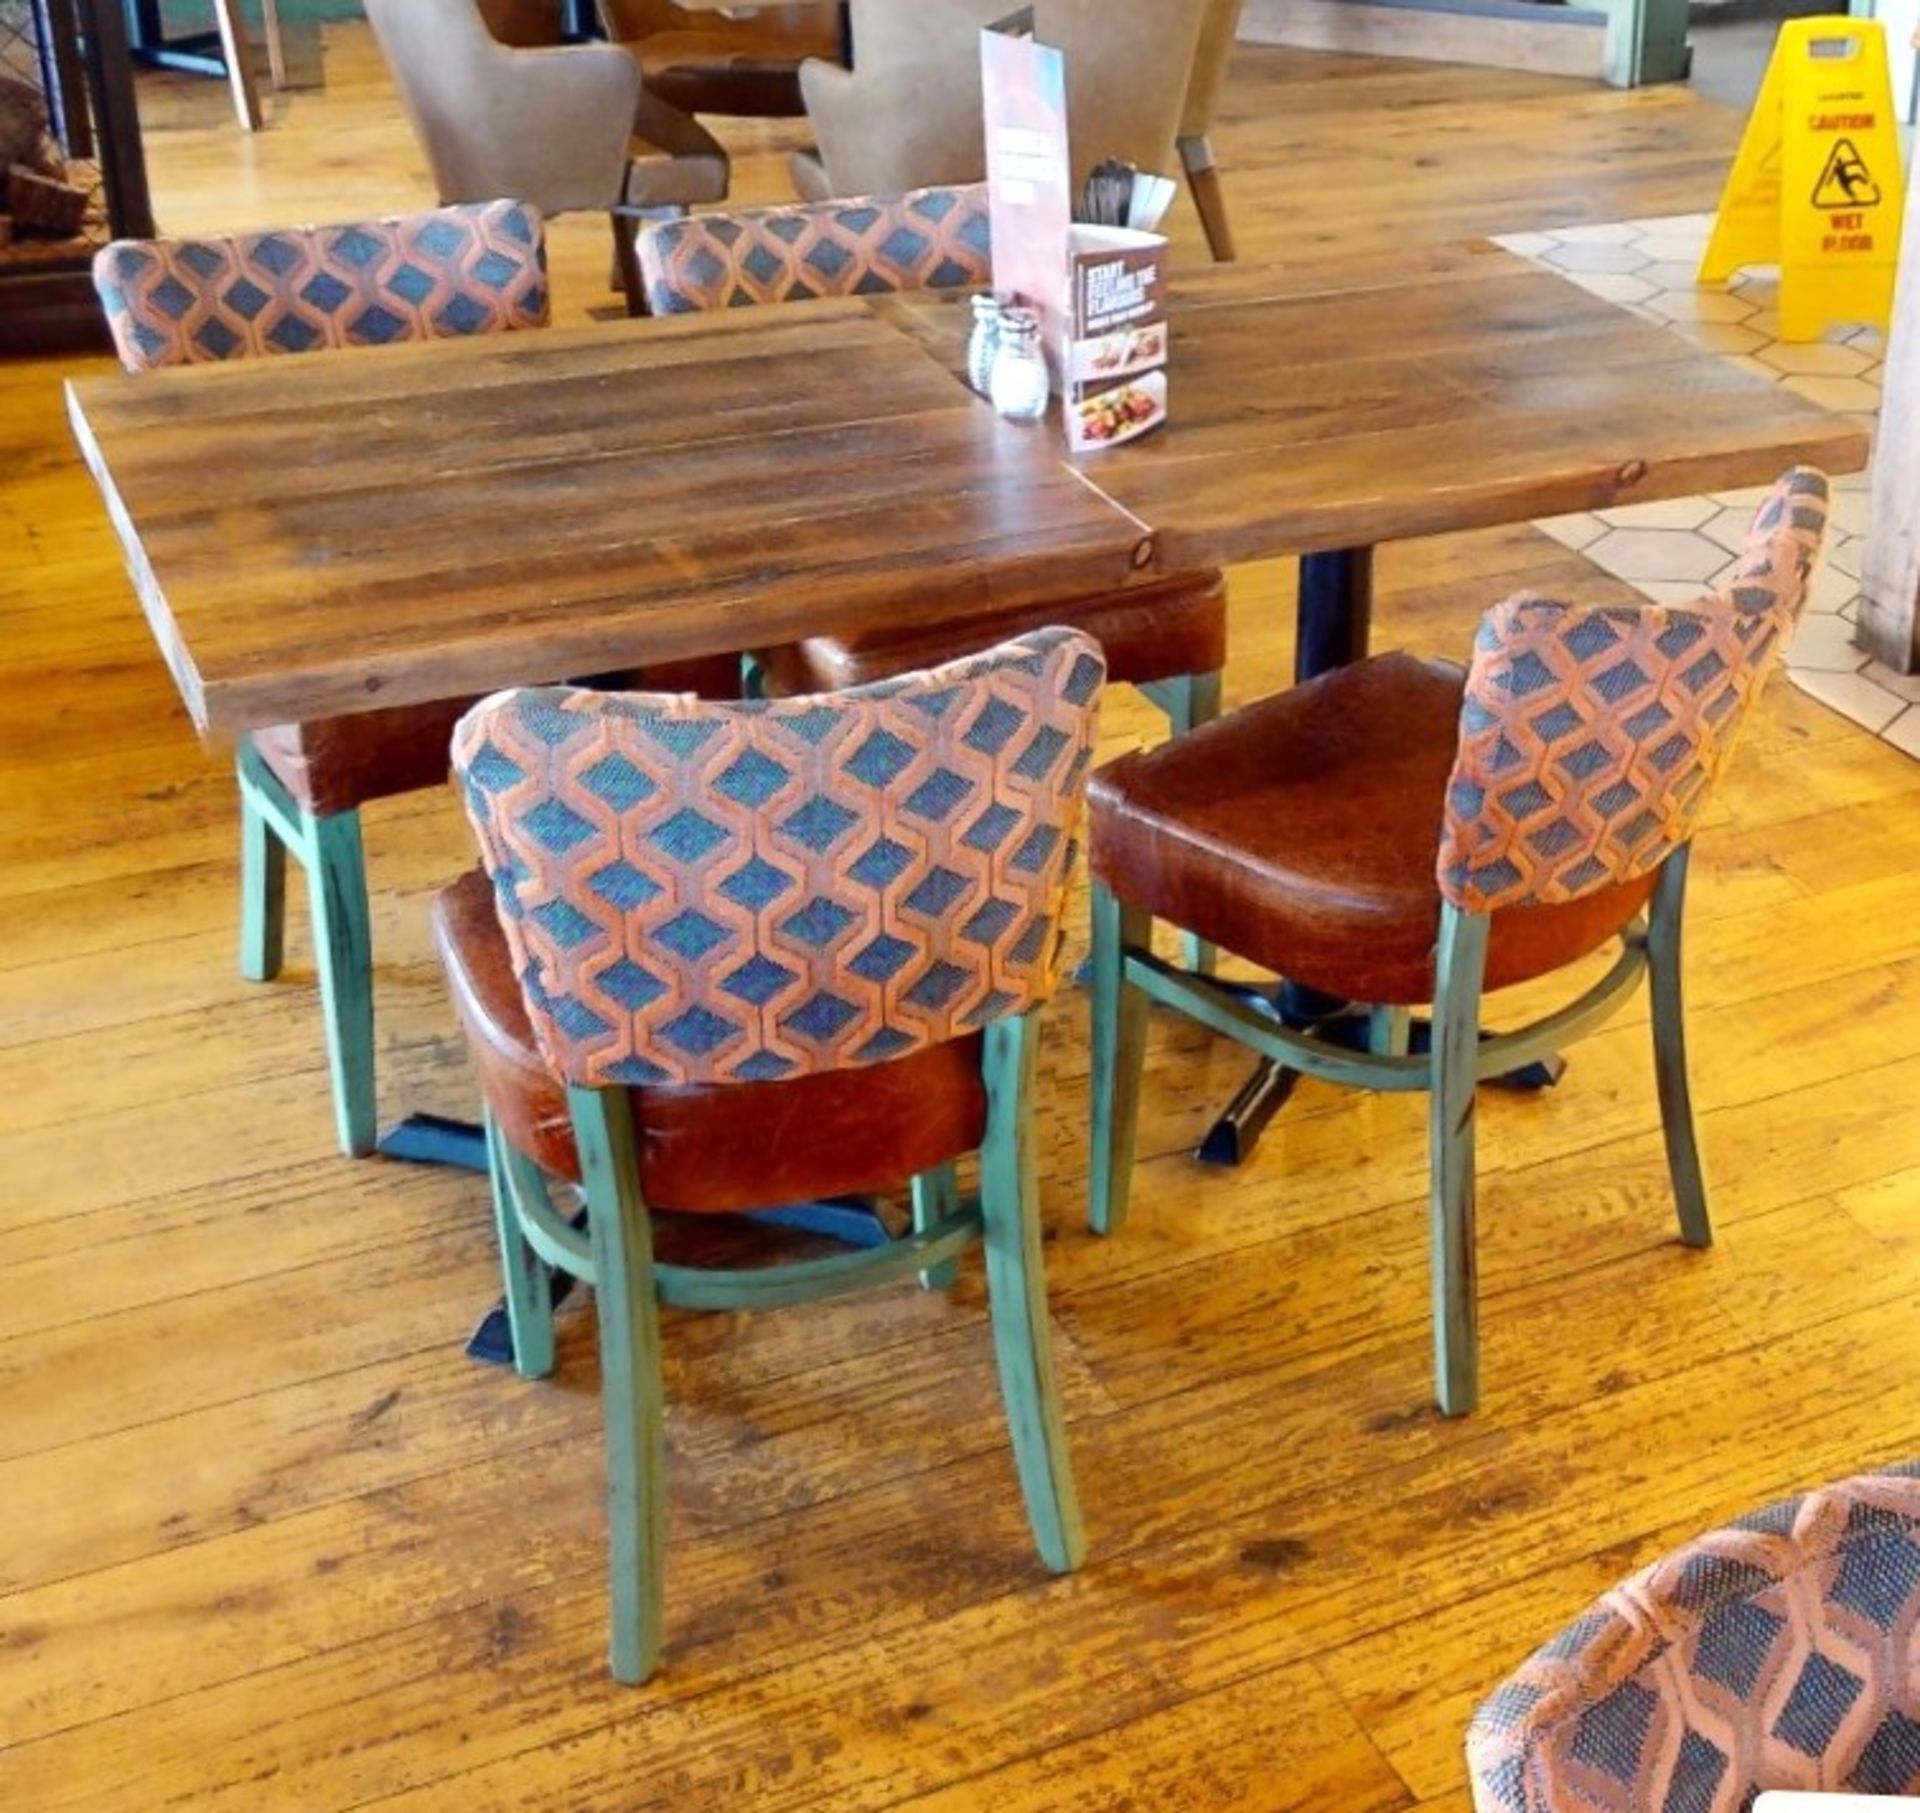 8 x Commercial Restaurant Dining Chairs Featuring Tan Leather Seats, Upholstered Back Rests and - Image 6 of 9